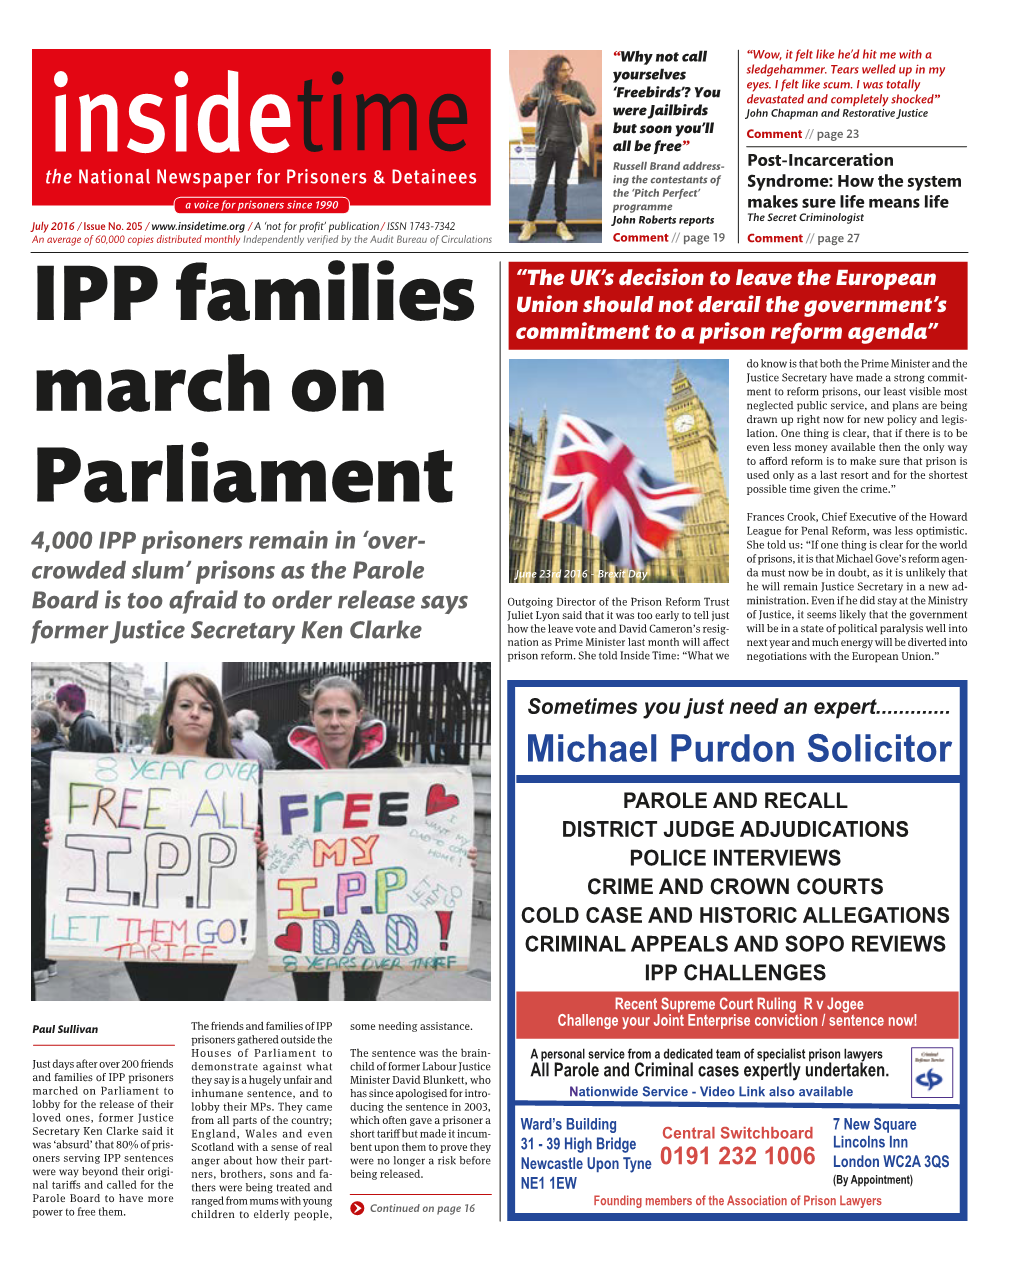 IPP Families March on Parliament